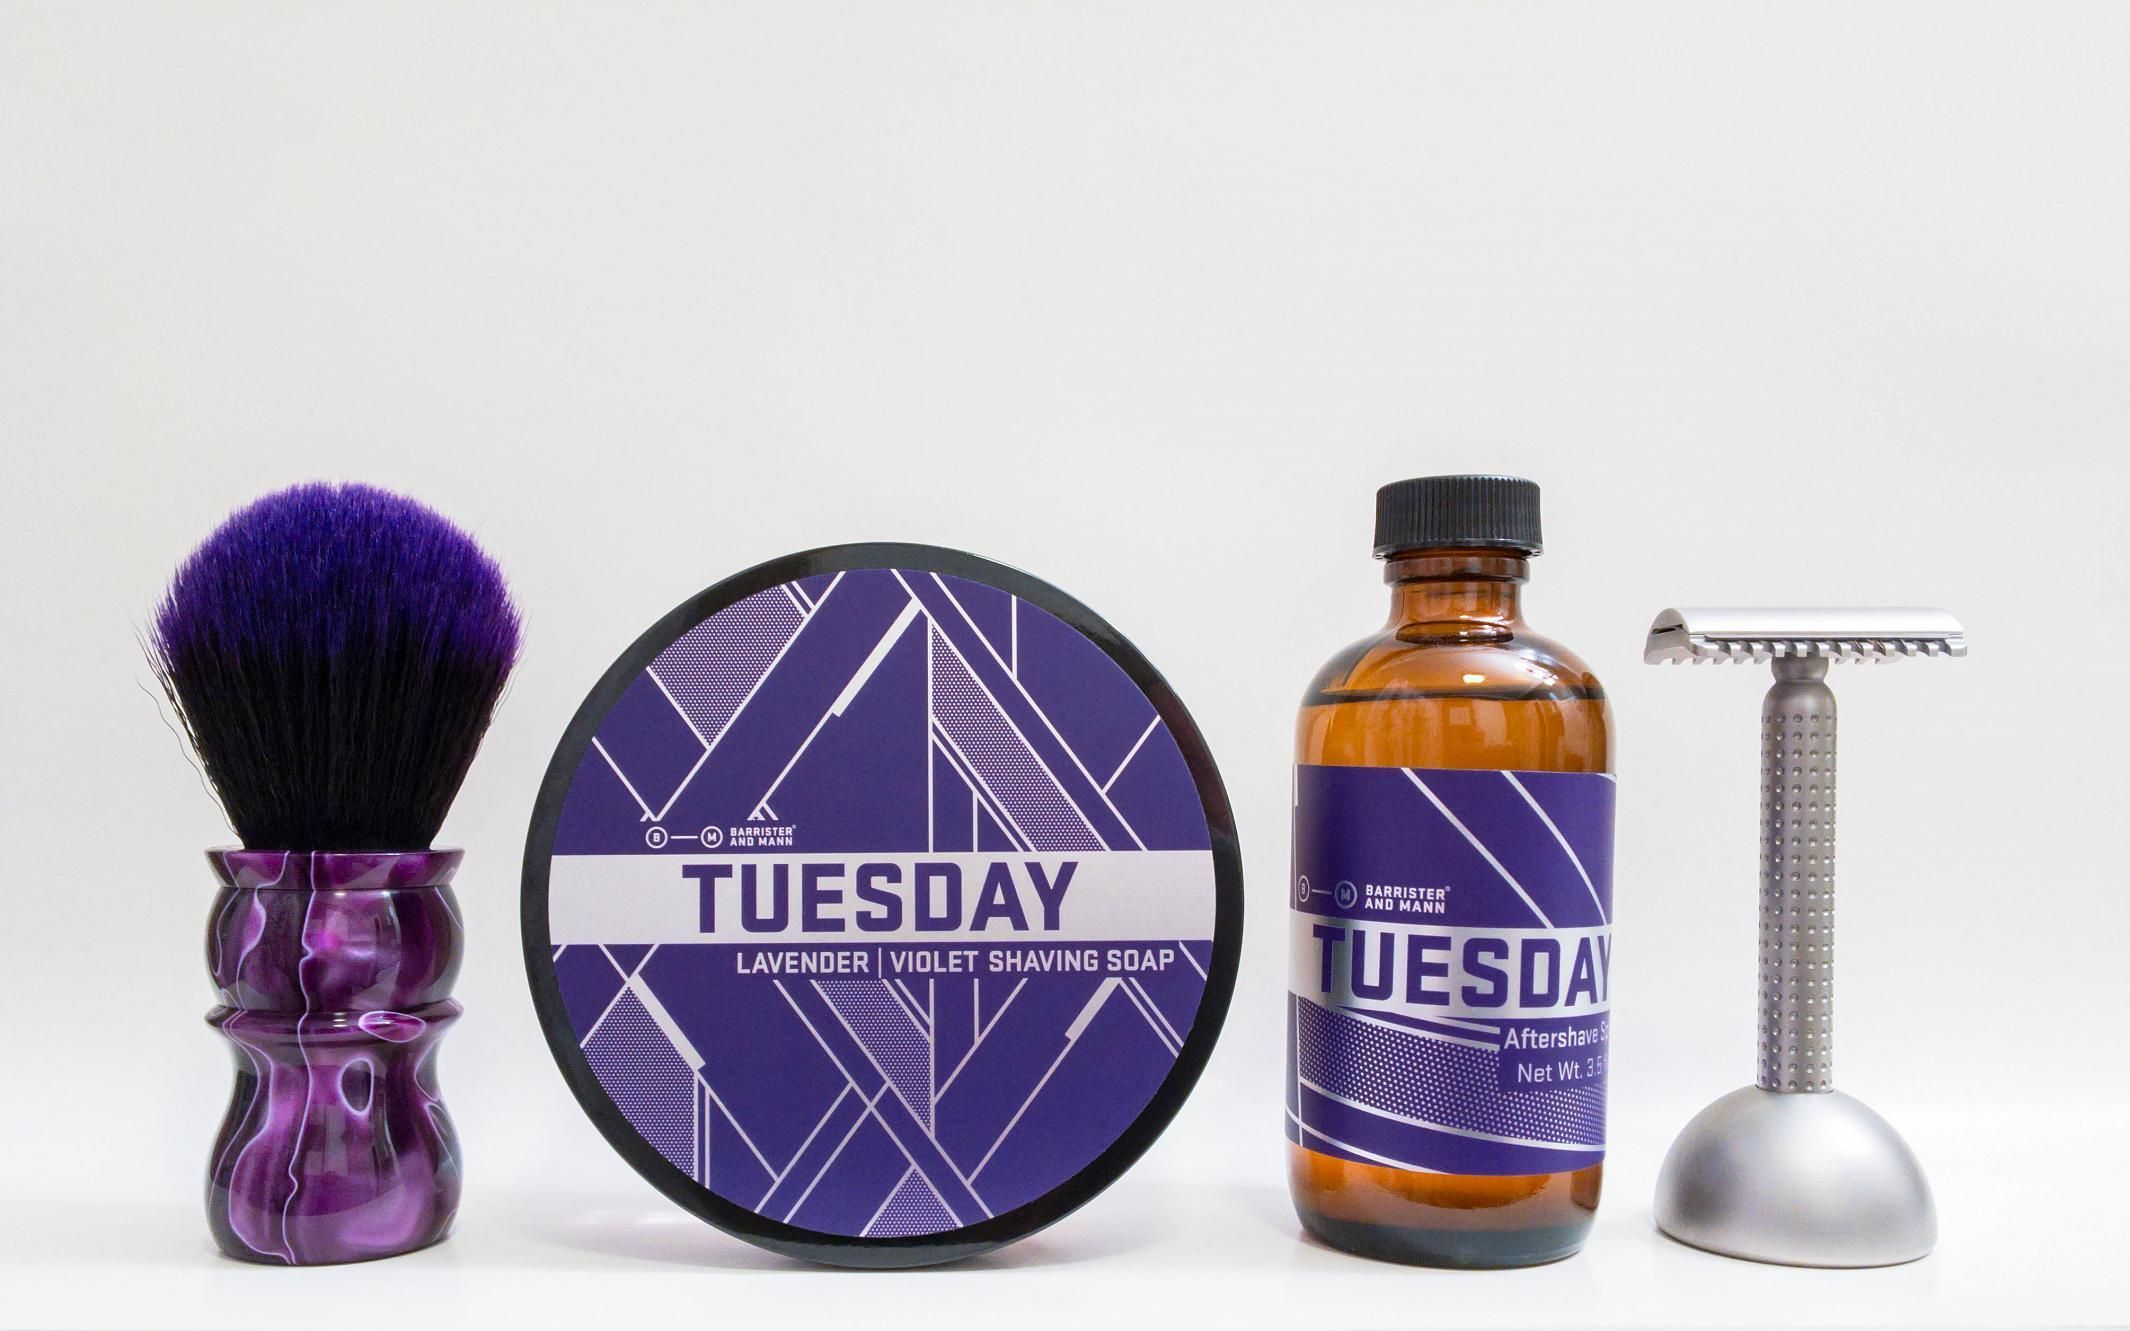 Barrister and Mann "Tuesday"